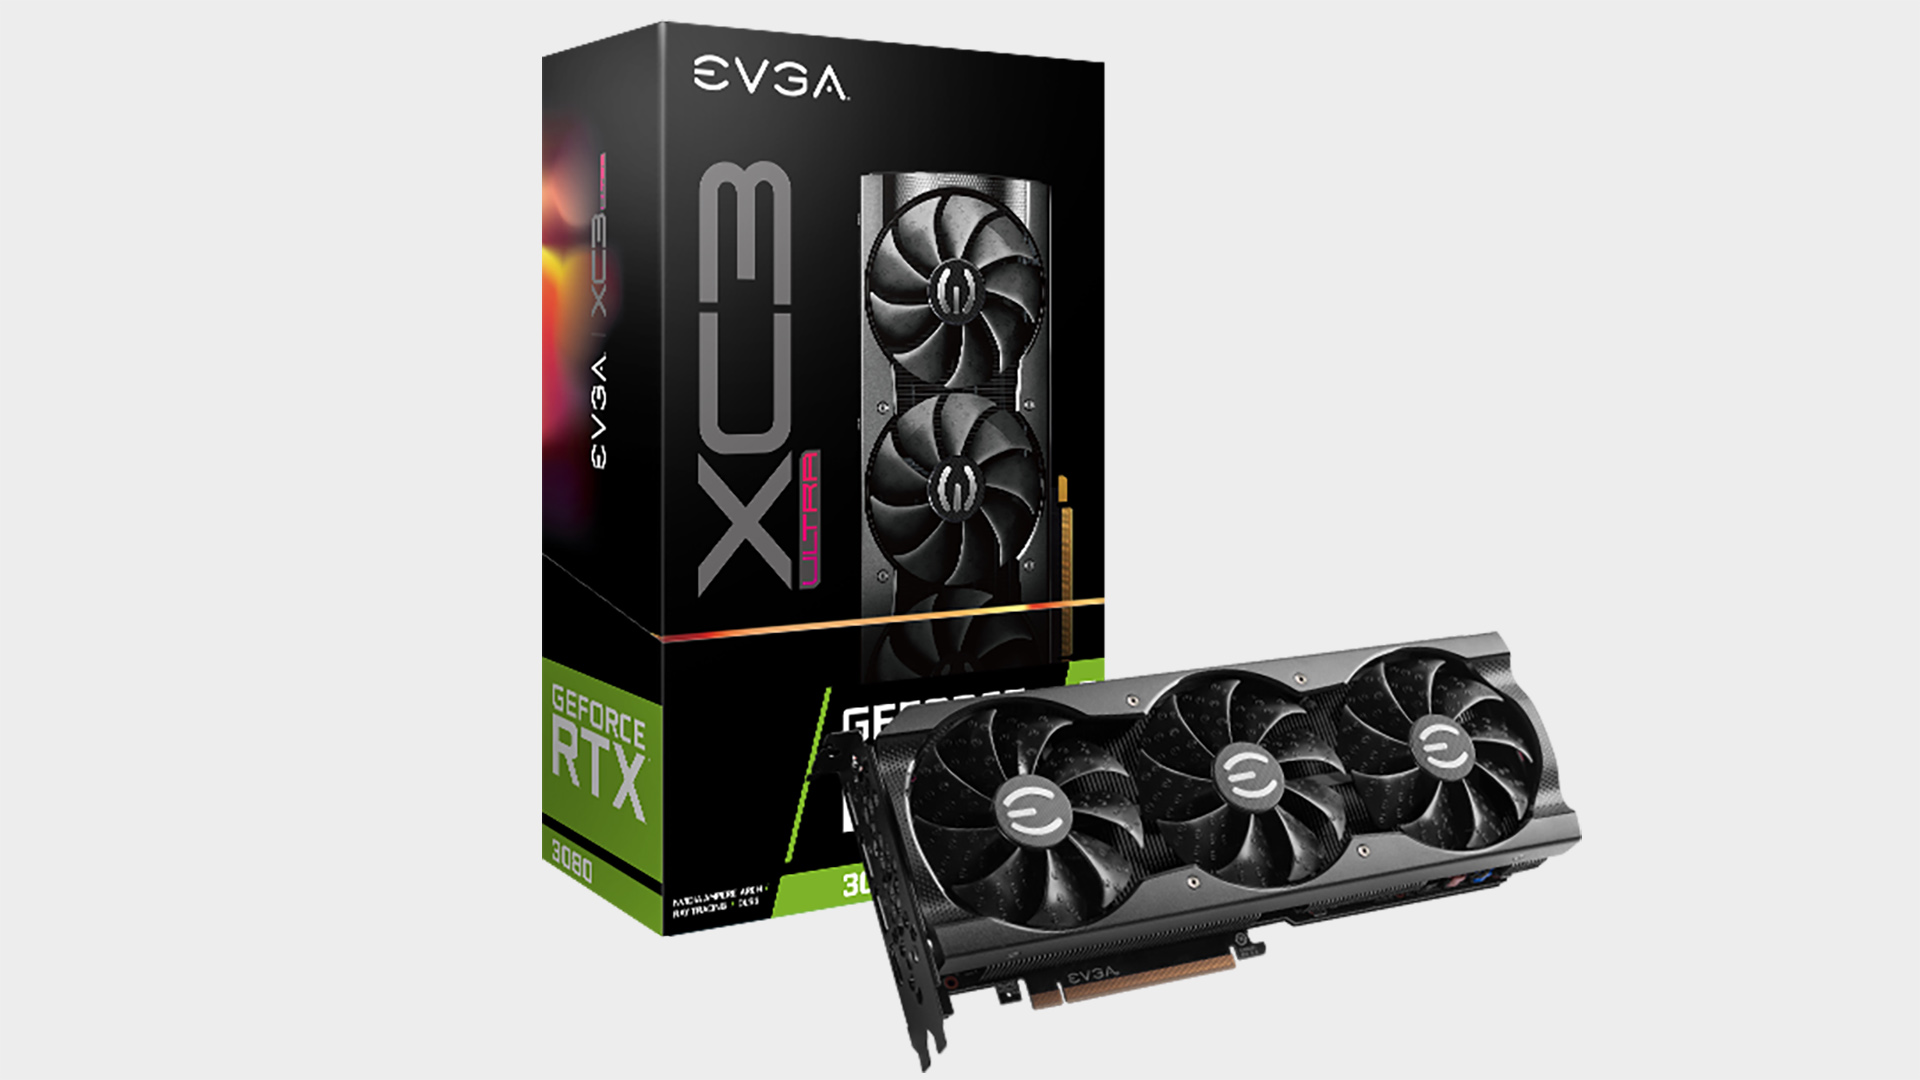  Graphics card prices are increasing, but EVGA will honour pre-tariff MSRPs in its GPU queue 